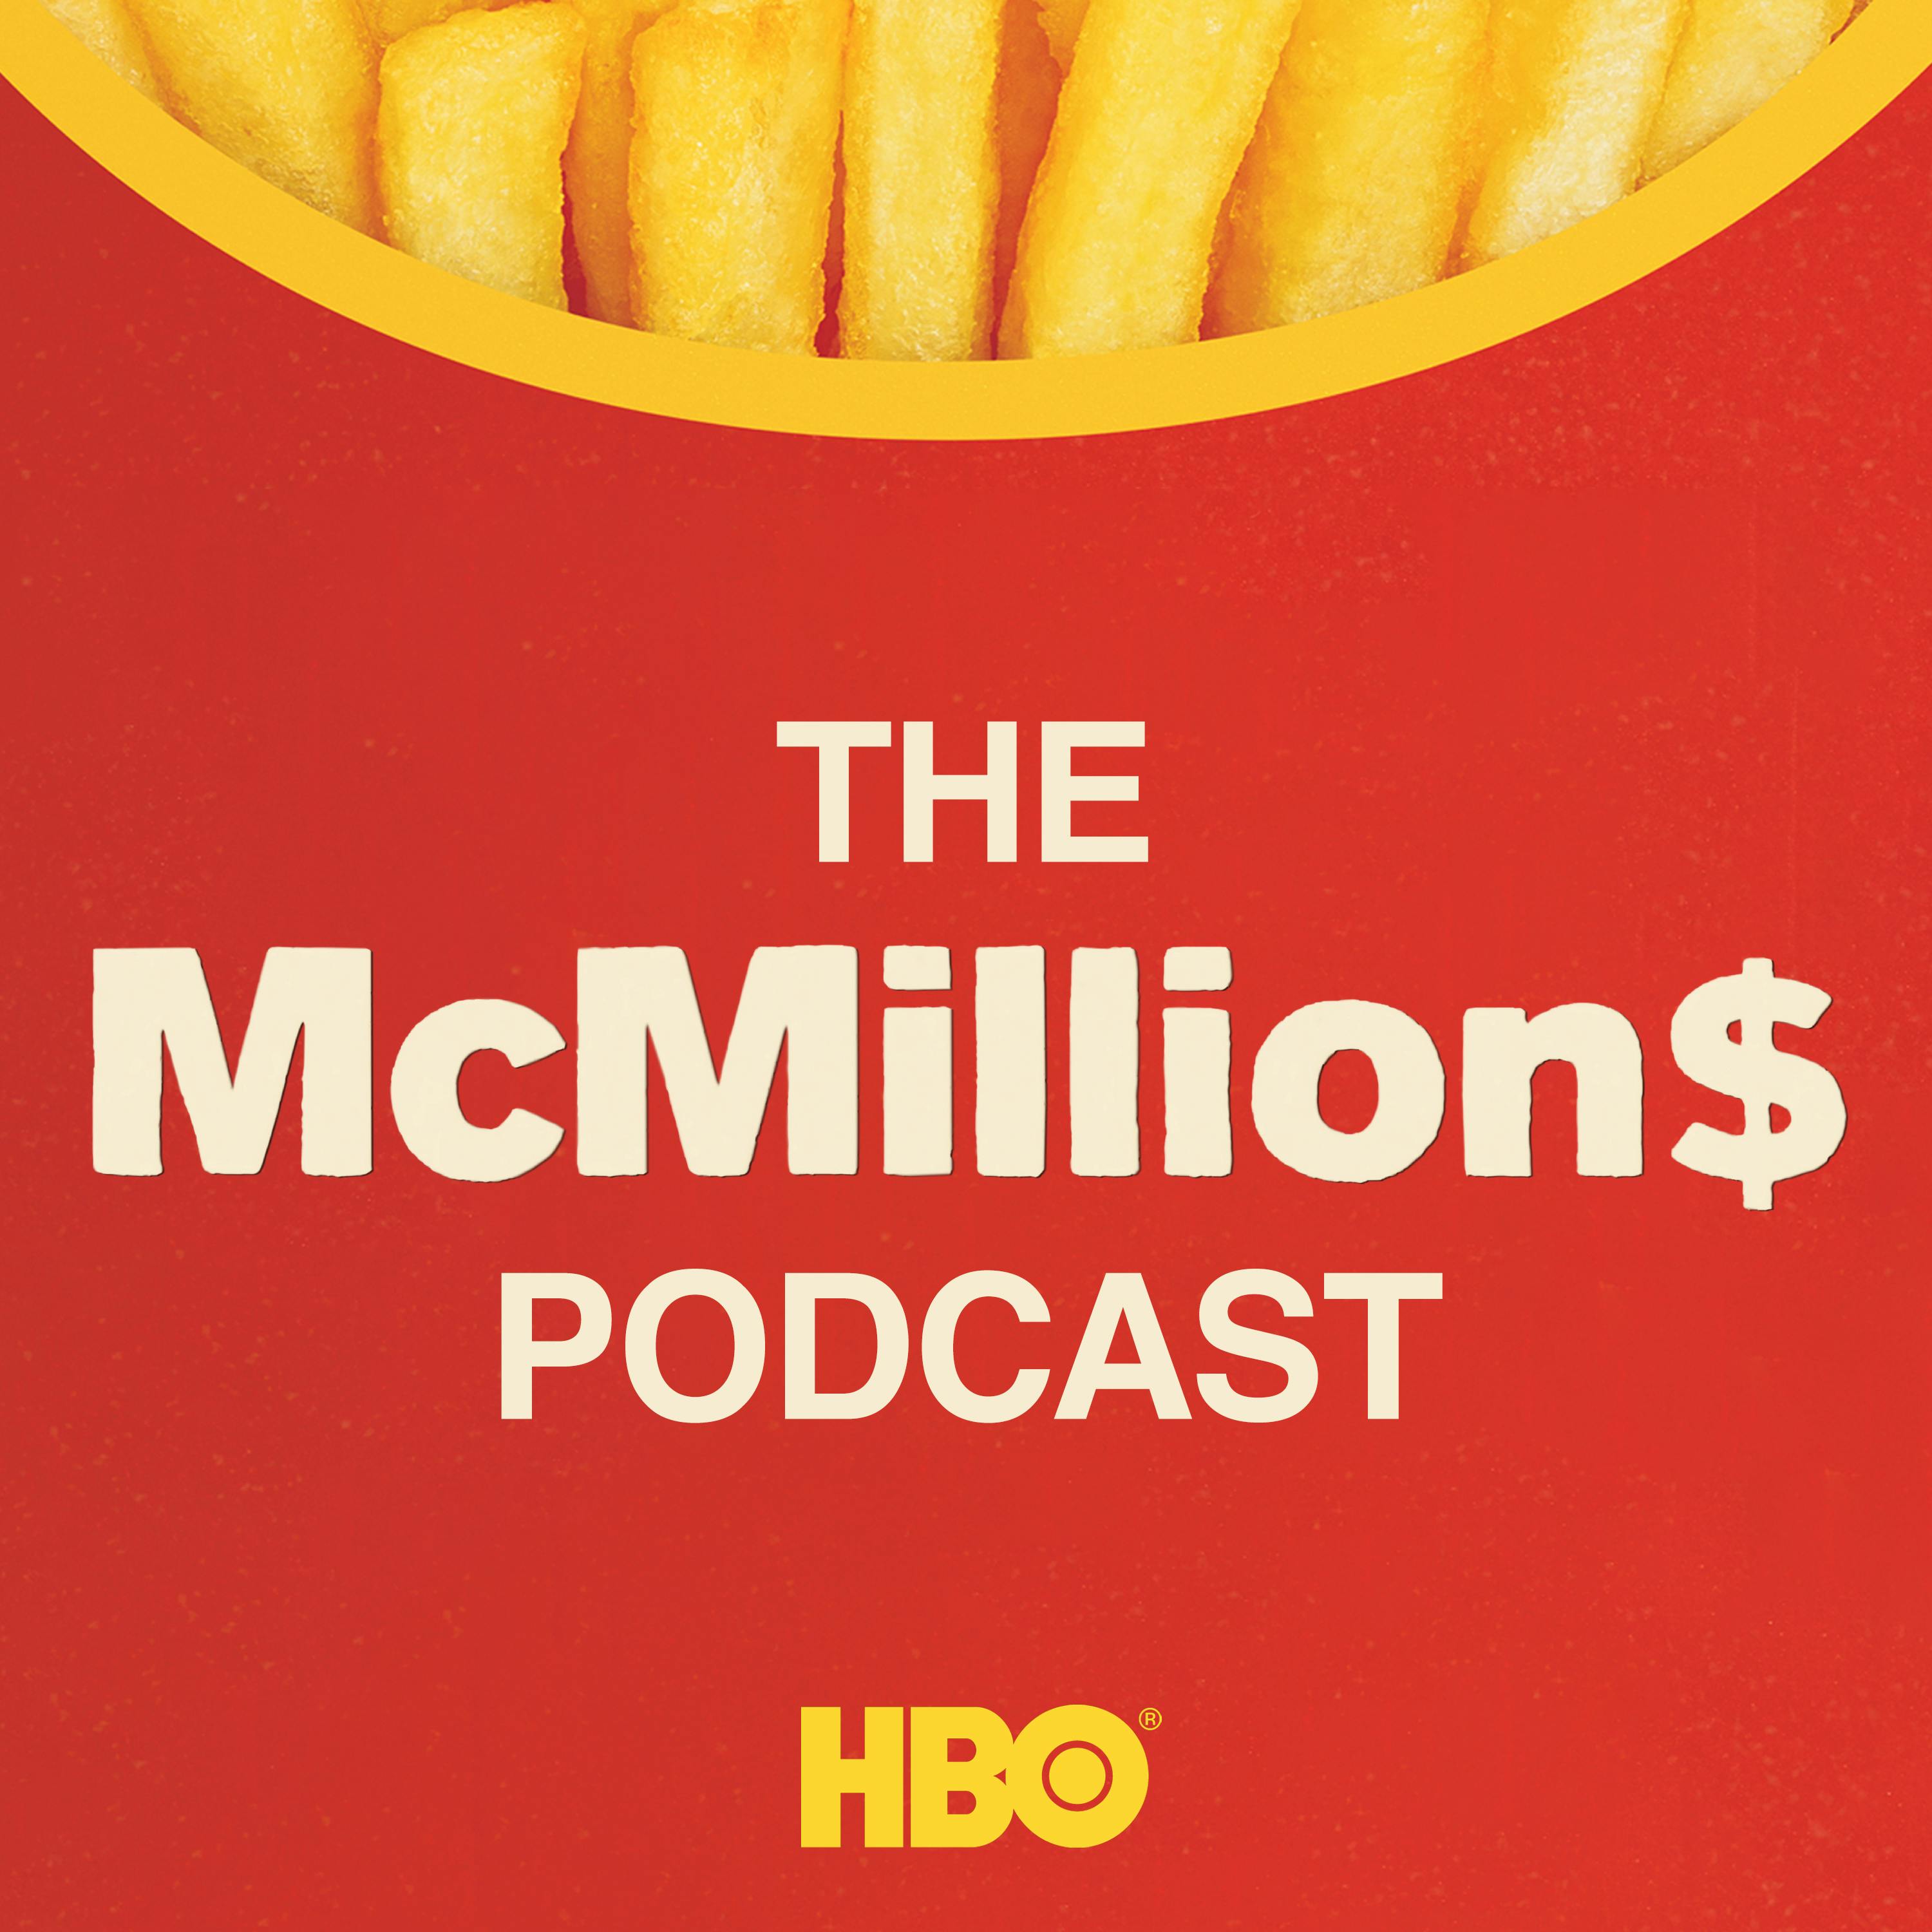 Coming Soon: The McMillion$ Podcast